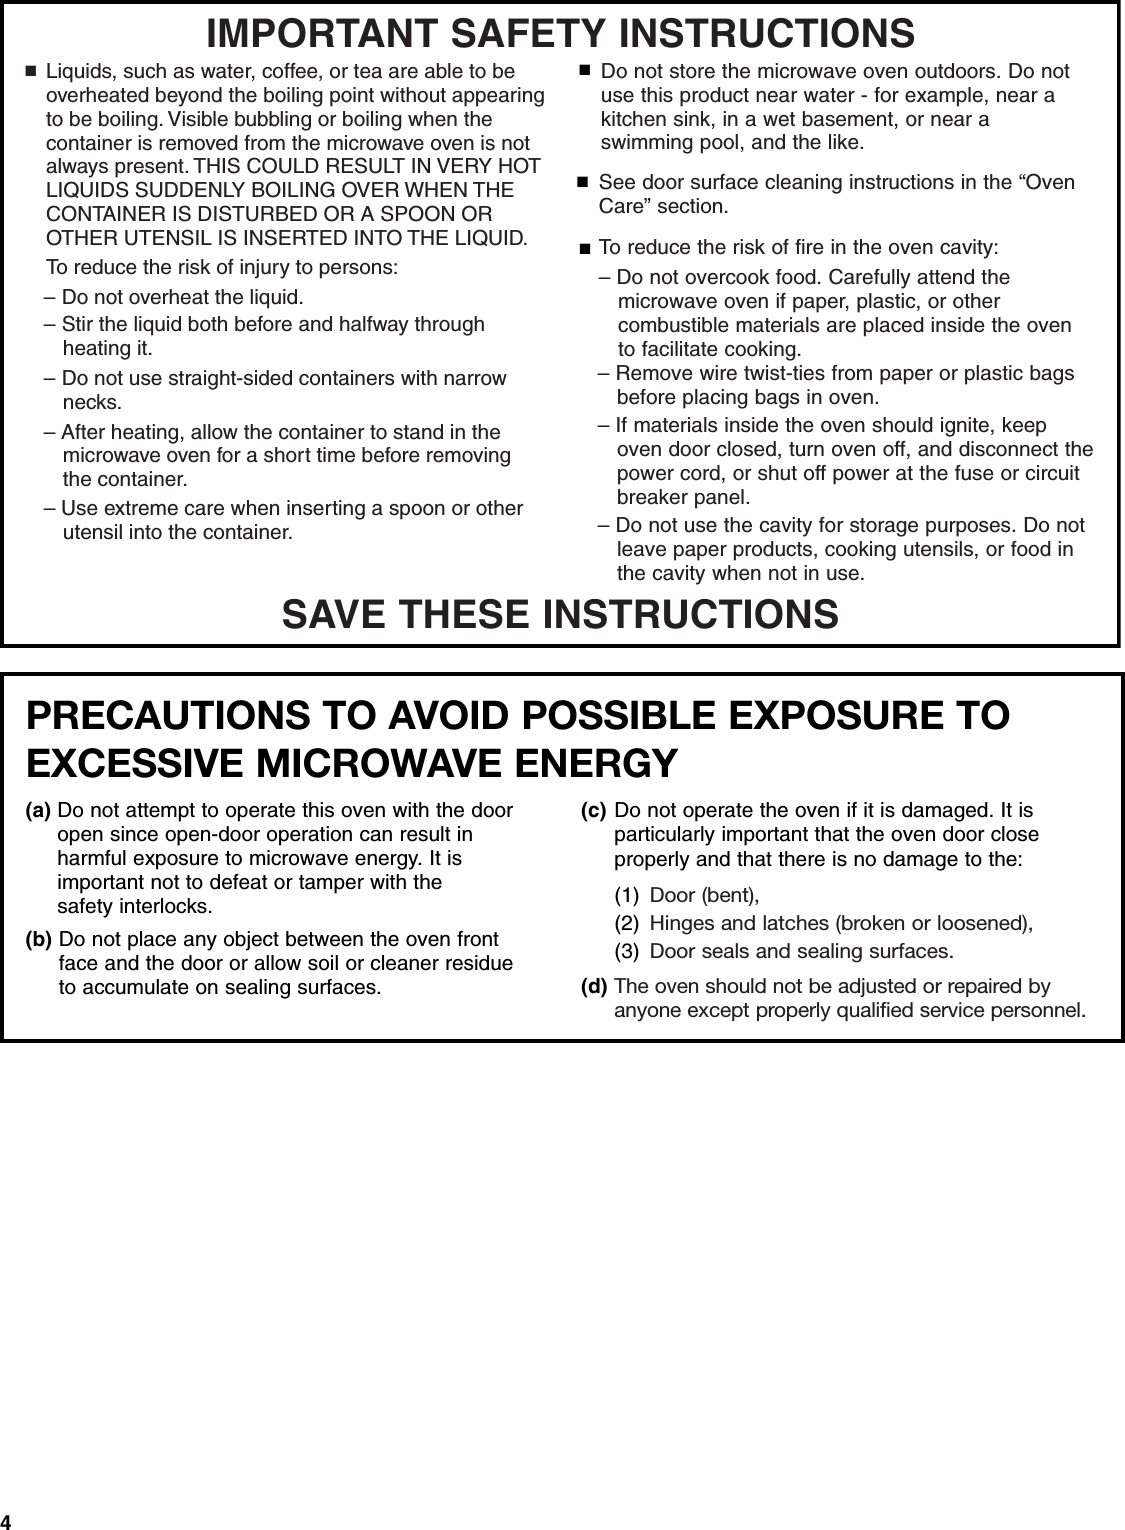 4SAVE THESE INSTRUCTIONSIMPORTANT SAFETY INSTRUCTIONSSee door surface cleaning instructions in the “Oven Care” section.To reduce the risk of fire in the oven cavity:– Do not overcook food. Carefully attend the    microwave oven if paper, plastic, or other    combustible materials are placed inside the oven    to facilitate cooking.■■■Do not store the microwave oven outdoors. Do not use this product near water - for example, near a kitchen sink, in a wet basement, or near a swimming pool, and the like.– Remove wire twist-ties from paper or plastic bags   before placing bags in oven.– If materials inside the oven should ignite, keep    oven door closed, turn oven off, and disconnect the    power cord, or shut off power at the fuse or circuit   breaker panel.– Do not use the cavity for storage purposes. Do not   leave paper products, cooking utensils, or food in    the cavity when not in use.To reduce the risk of injury to persons:■Liquids, such as water, coffee, or tea are able to be overheated beyond the boiling point without appearing to be boiling. Visible bubbling or boiling when the container is removed from the microwave oven is not always present. THIS COULD RESULT IN VERY HOT LIQUIDS SUDDENLY BOILING OVER WHEN THE CONTAINER IS DISTURBED OR A SPOON OR OTHER UTENSIL IS INSERTED INTO THE LIQUID.– Do not overheat the liquid.– Stir the liquid both before and halfway through heating it.– Do not use straight-sided containers with narrow necks.– After heating, allow the container to stand in the microwave oven for a short time before removing the container.– Use extreme care when inserting a spoon or other utensil into the container.PRECAUTIONS TO AVOID POSSIBLE EXPOSURE TO EXCESSIVE MICROWAVE ENERGY (a) Do not attempt to operate this oven with the door open since open-door operation can result in harmful exposure to microwave energy. It isimportant not to defeat or tamper with the safety interlocks.(b) Do not place any object between the oven front face and the door or allow soil or cleaner residue to accumulate on sealing surfaces.(c) Do not operate the oven if it is damaged. It is particularly important that the oven door close properly and that there is no damage to the: (1) Door (bent),(2) Hinges and latches (broken or loosened), (3) Door seals and sealing surfaces.(d) The oven should not be adjusted or repaired by anyone except properly qualified service personnel.